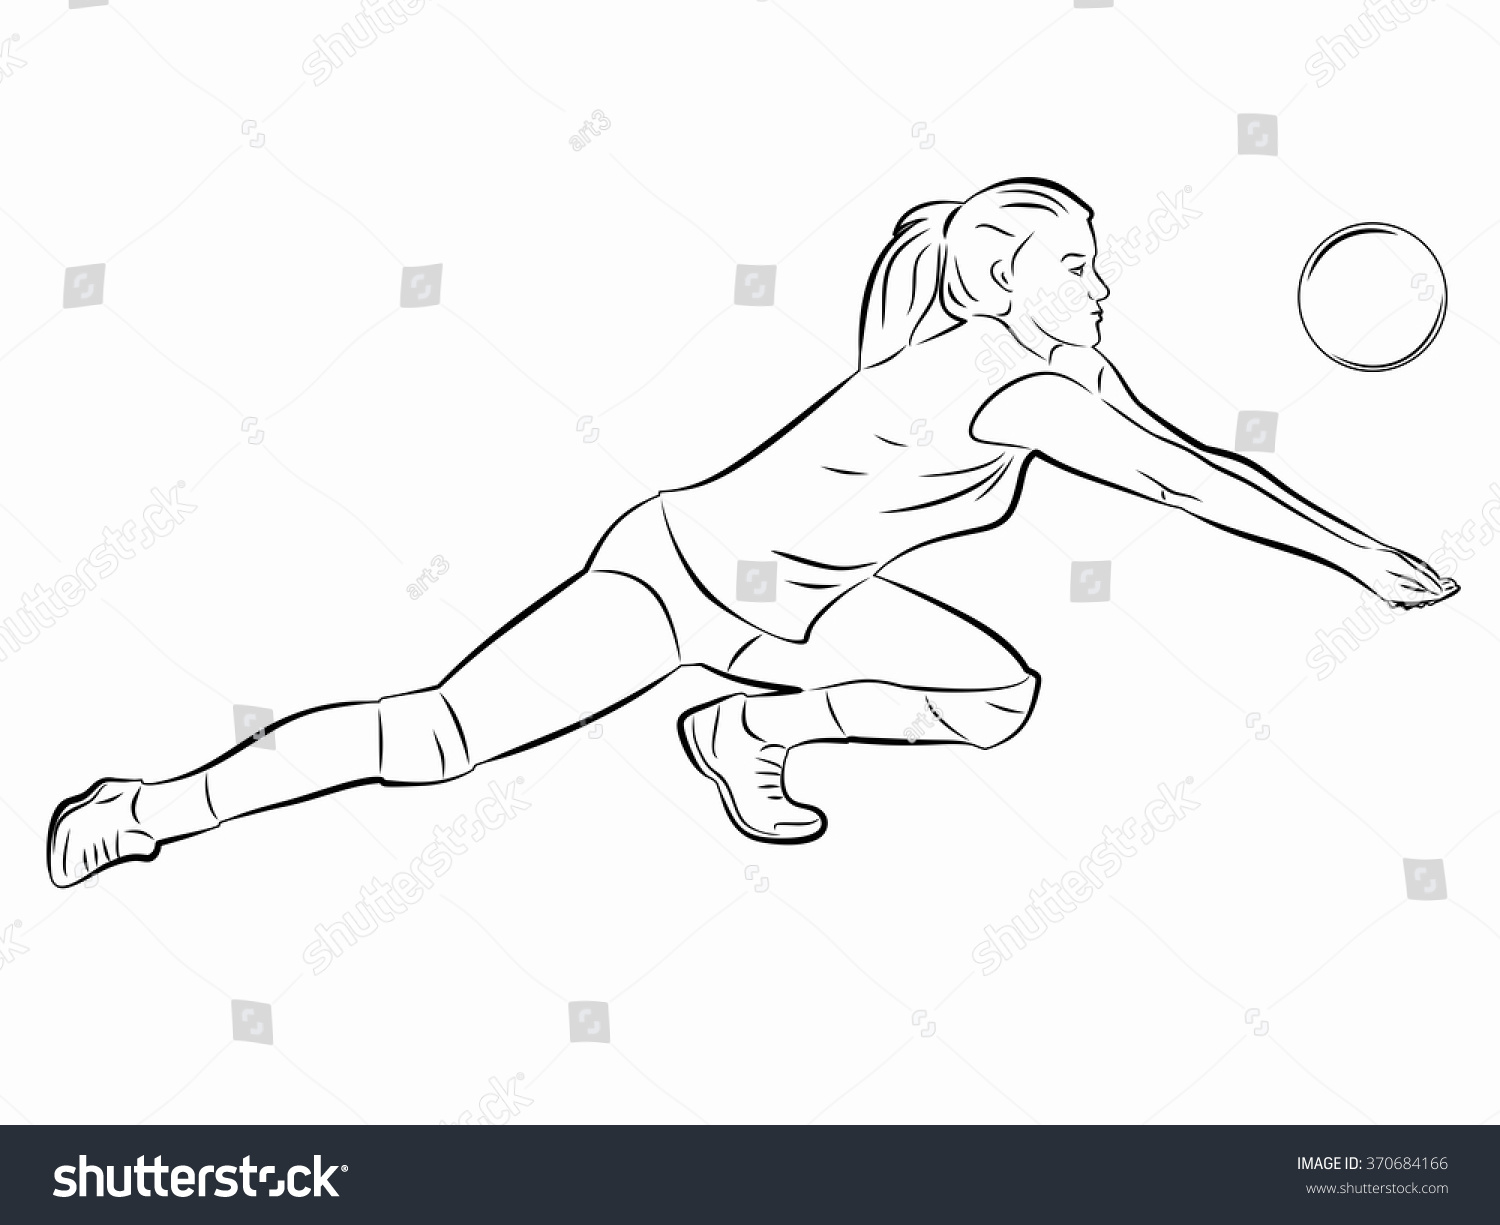 Illustration Woman Playing Volleyball Black White Stock Vector ...